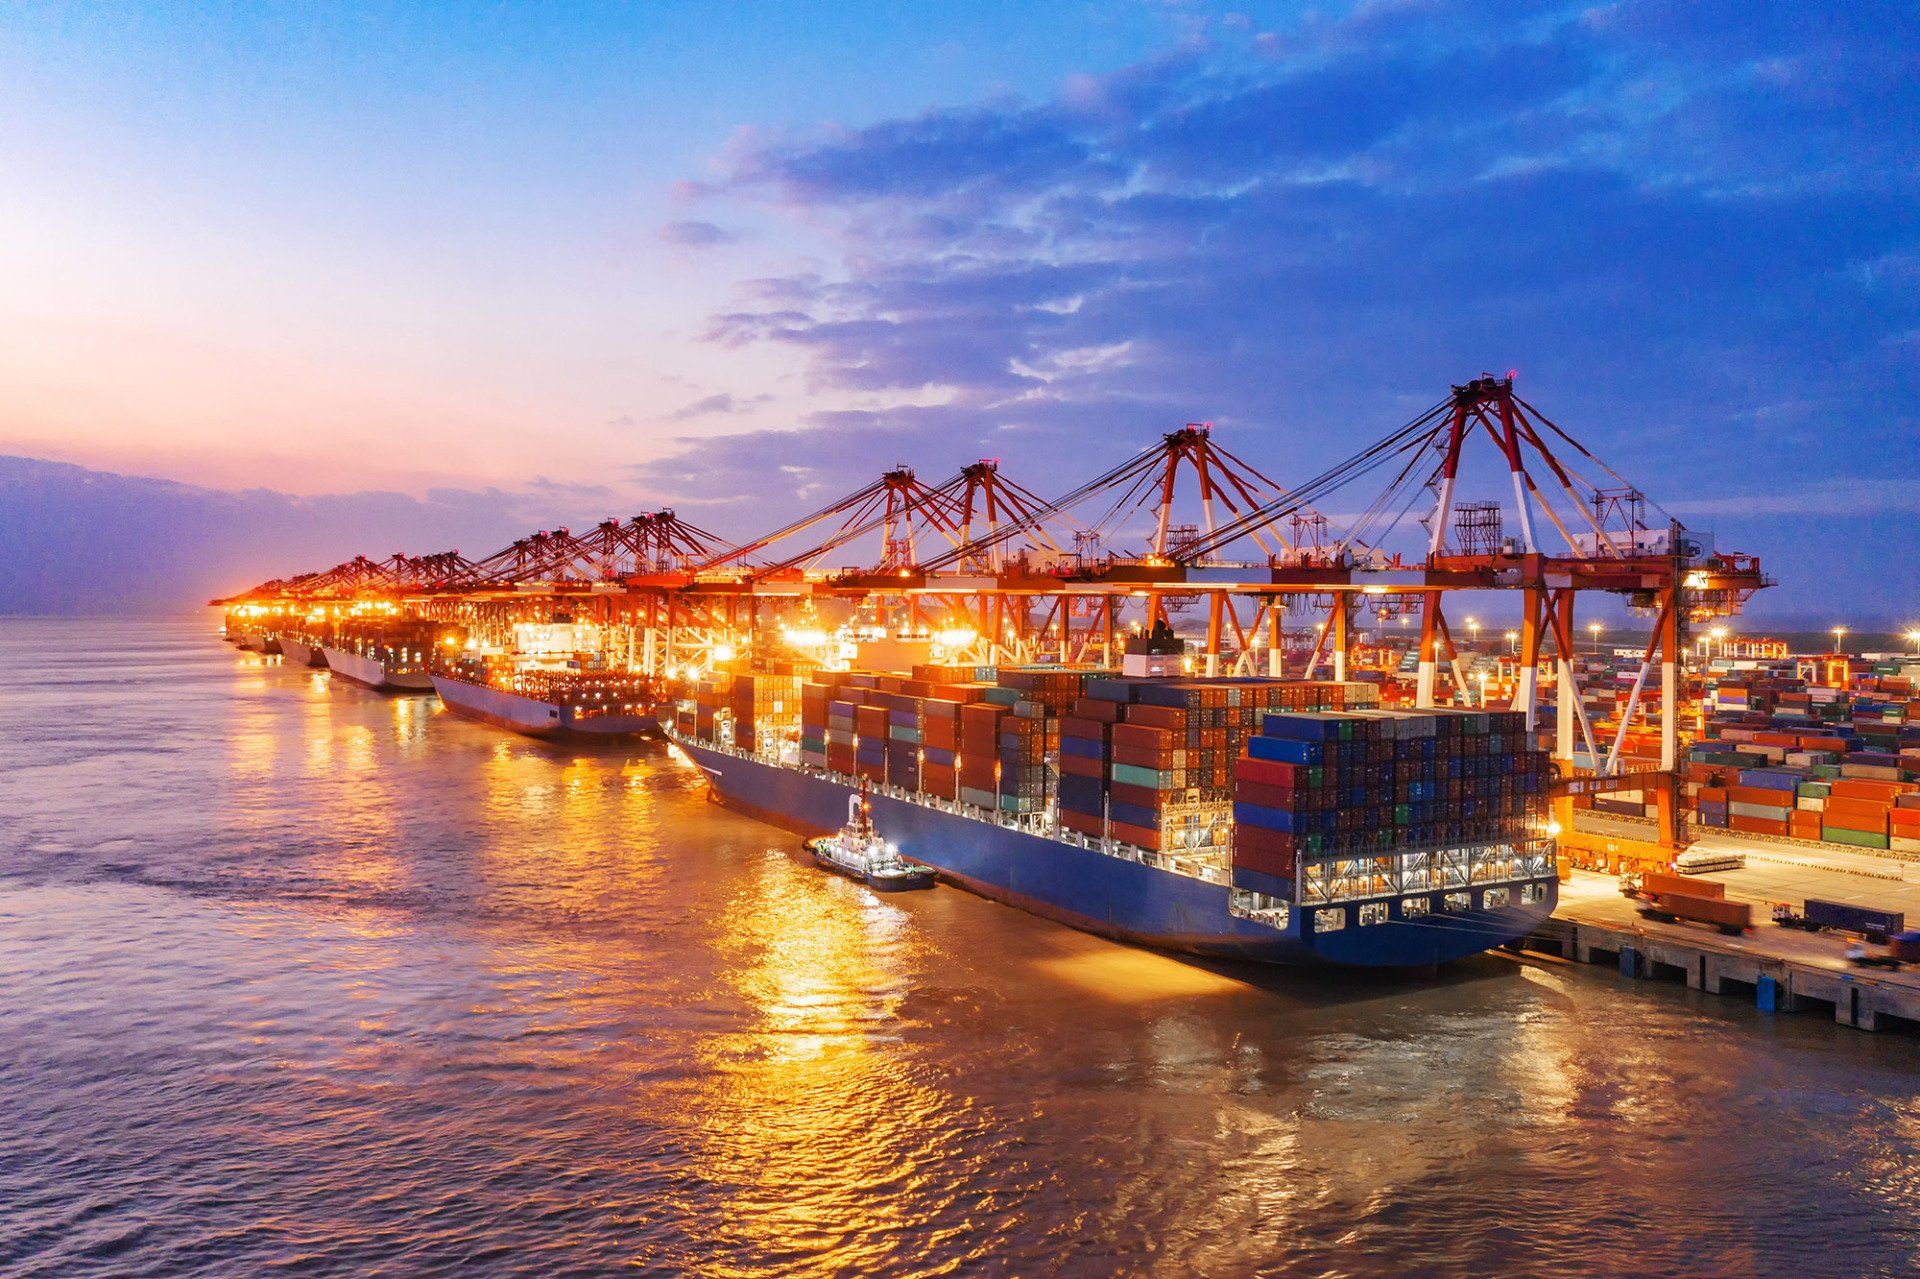 ICC has announced the release of Incoterms® 2020 in early September 2019.